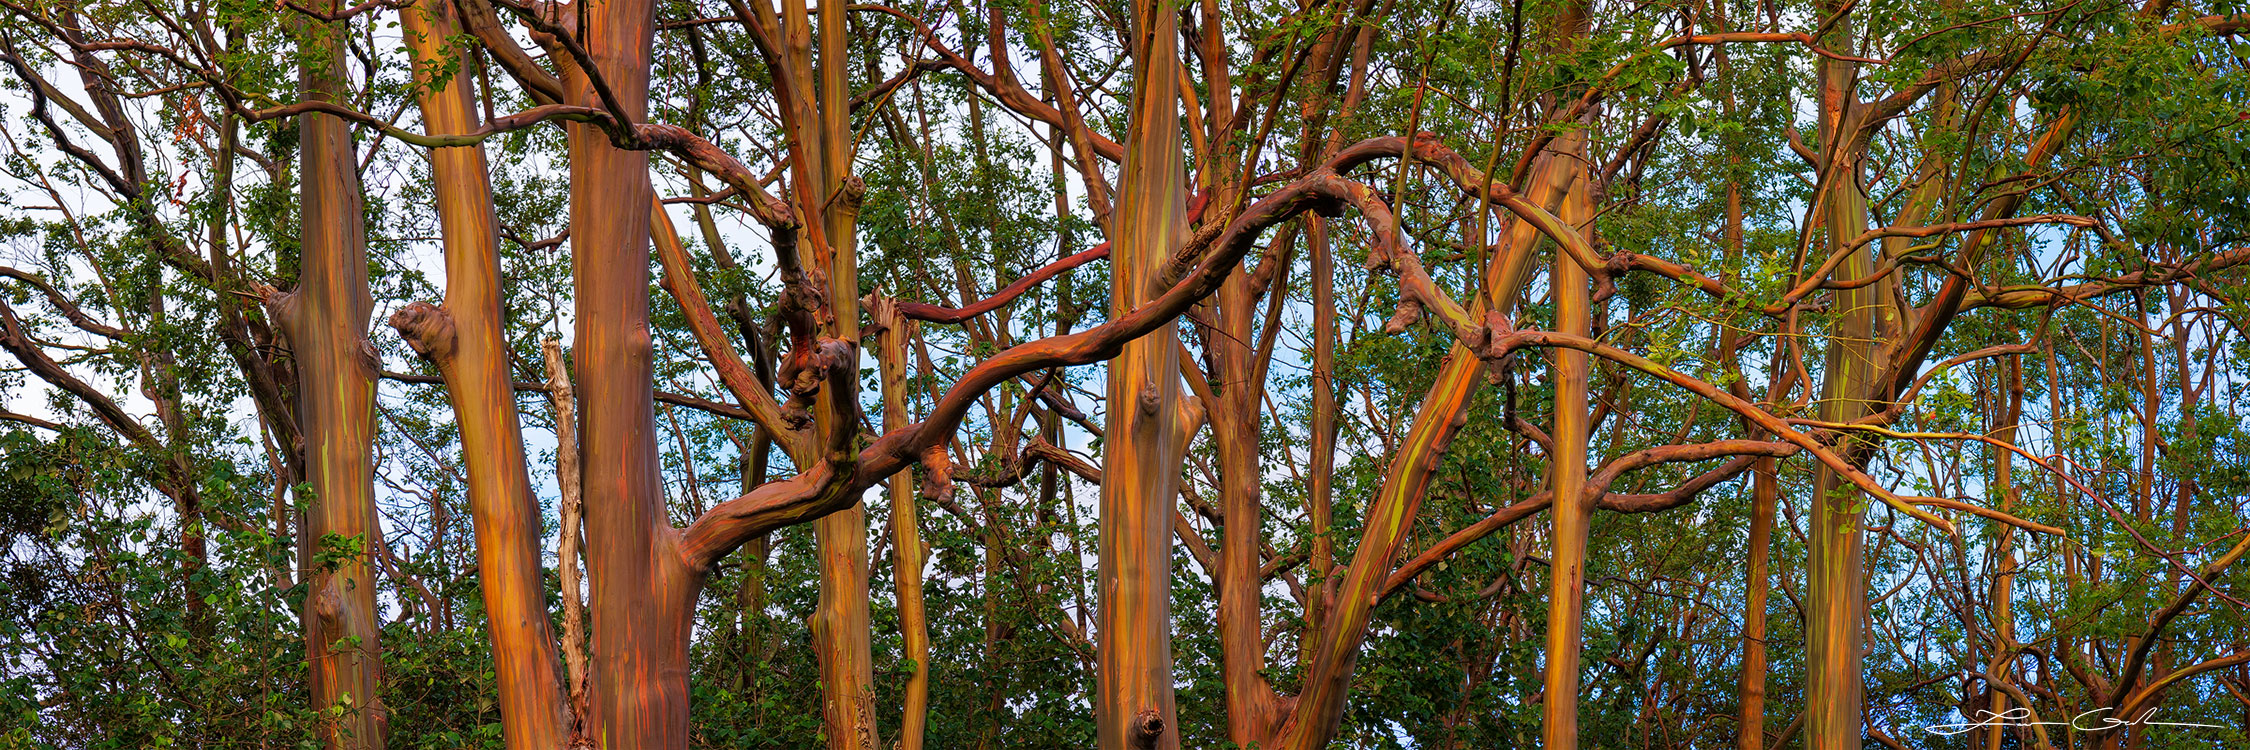 Pano fine art photo print showcasing an intertwining maze of eucalyptus trees with vibrant trunks and lush green foliage in Maui - Gintchin Fine Art.